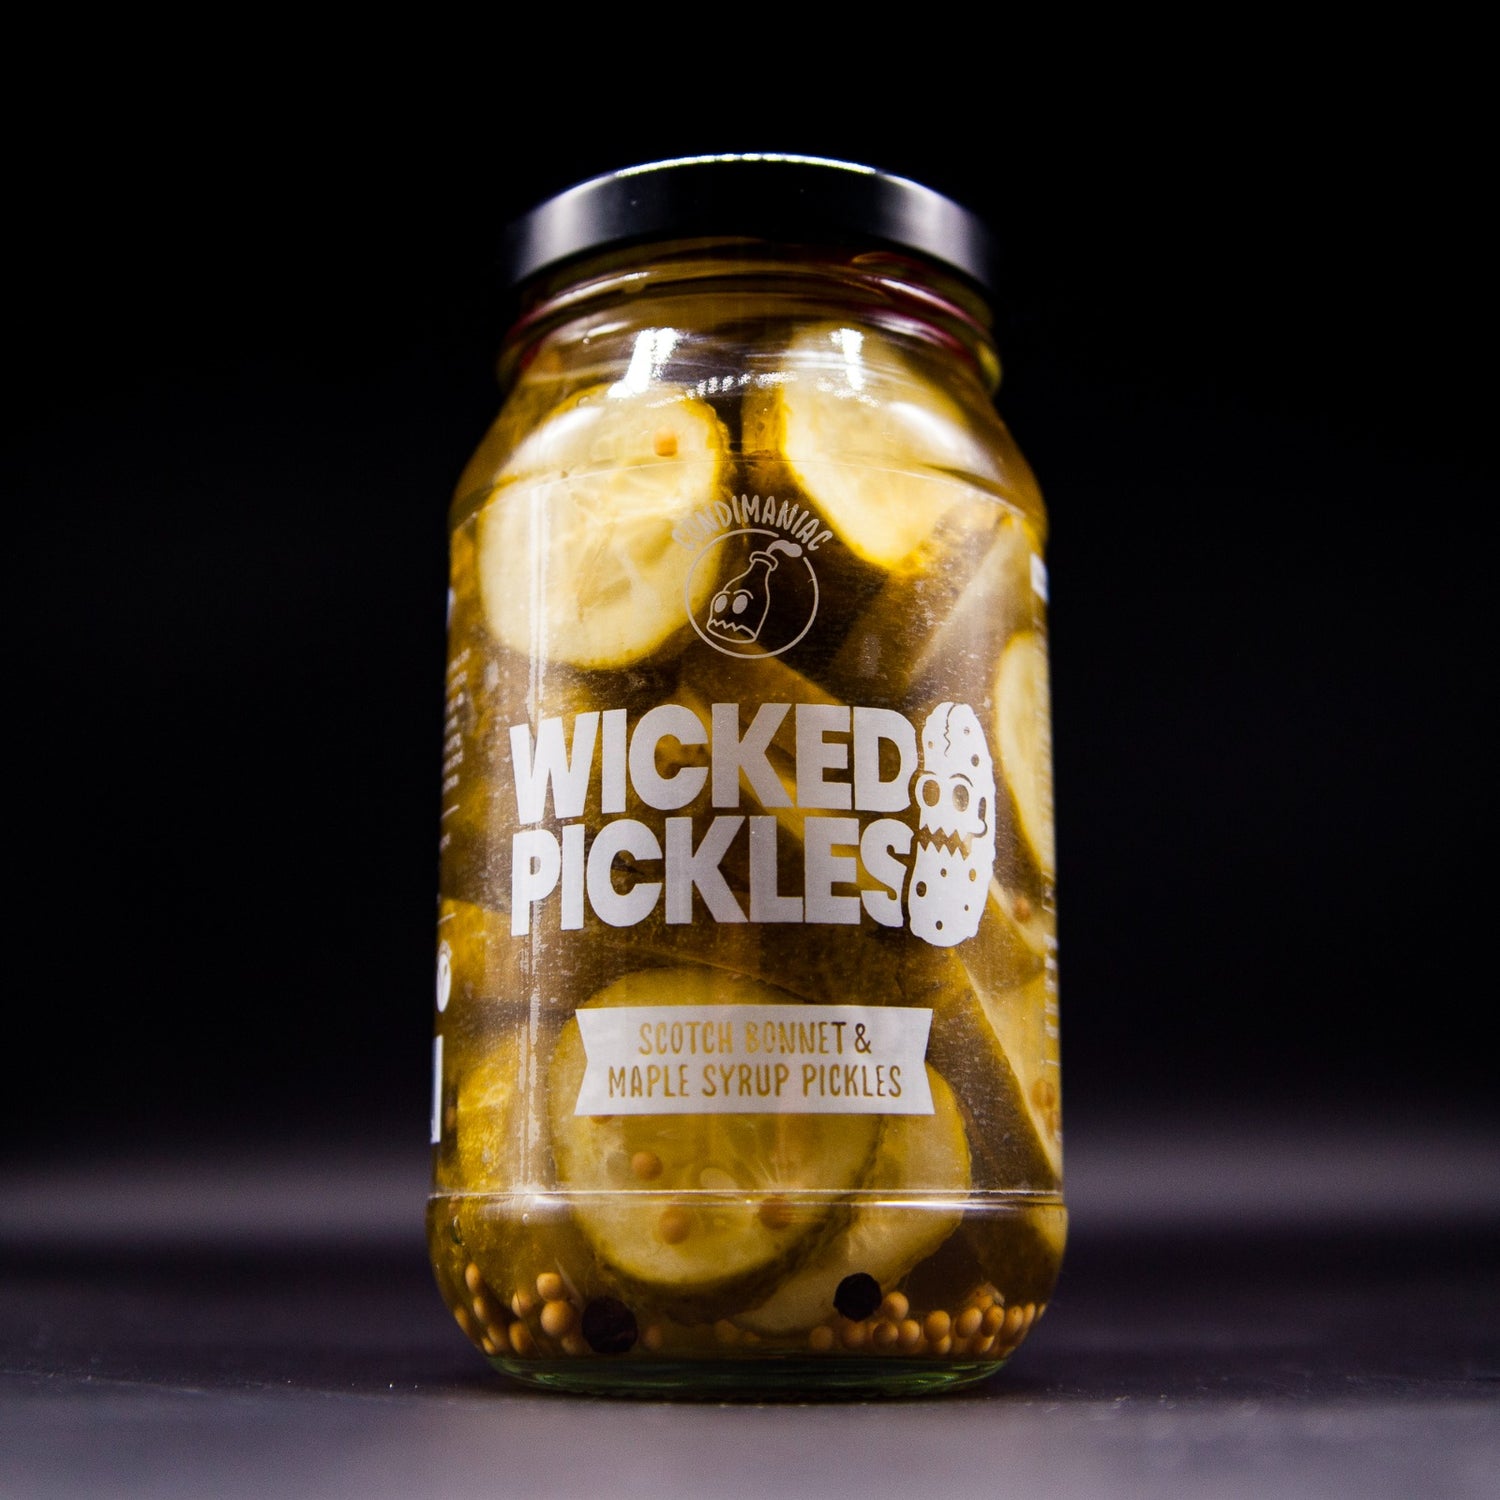 Condimaniac's Wicked Pickles - the perfect crunchy pickle is here!